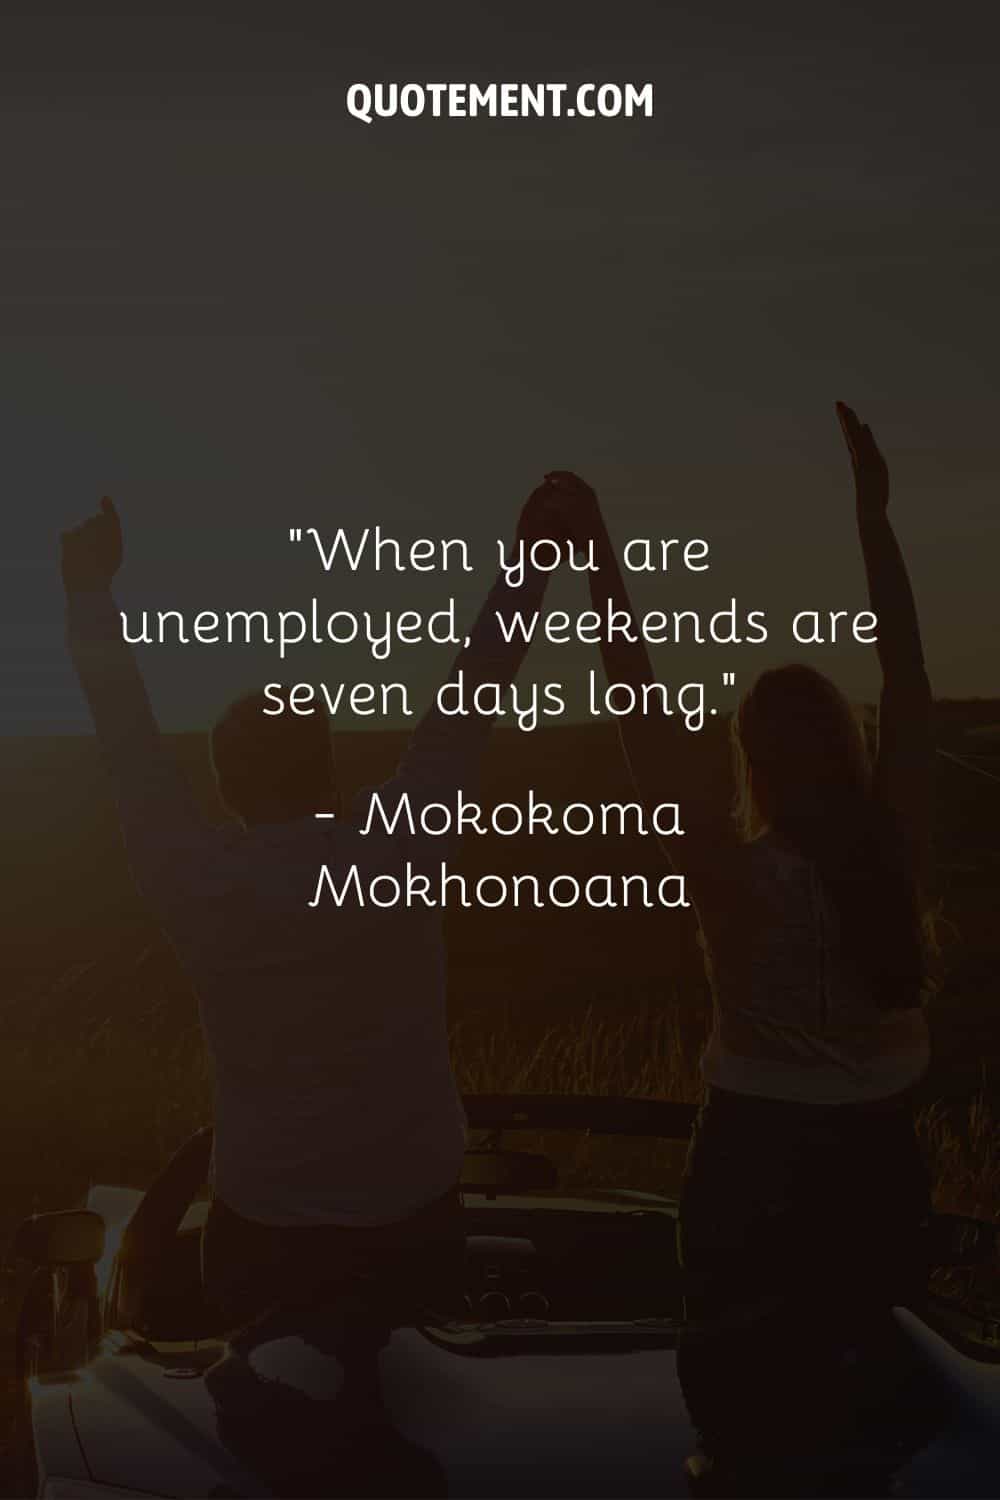 When you are unemployed, weekends are seven days long